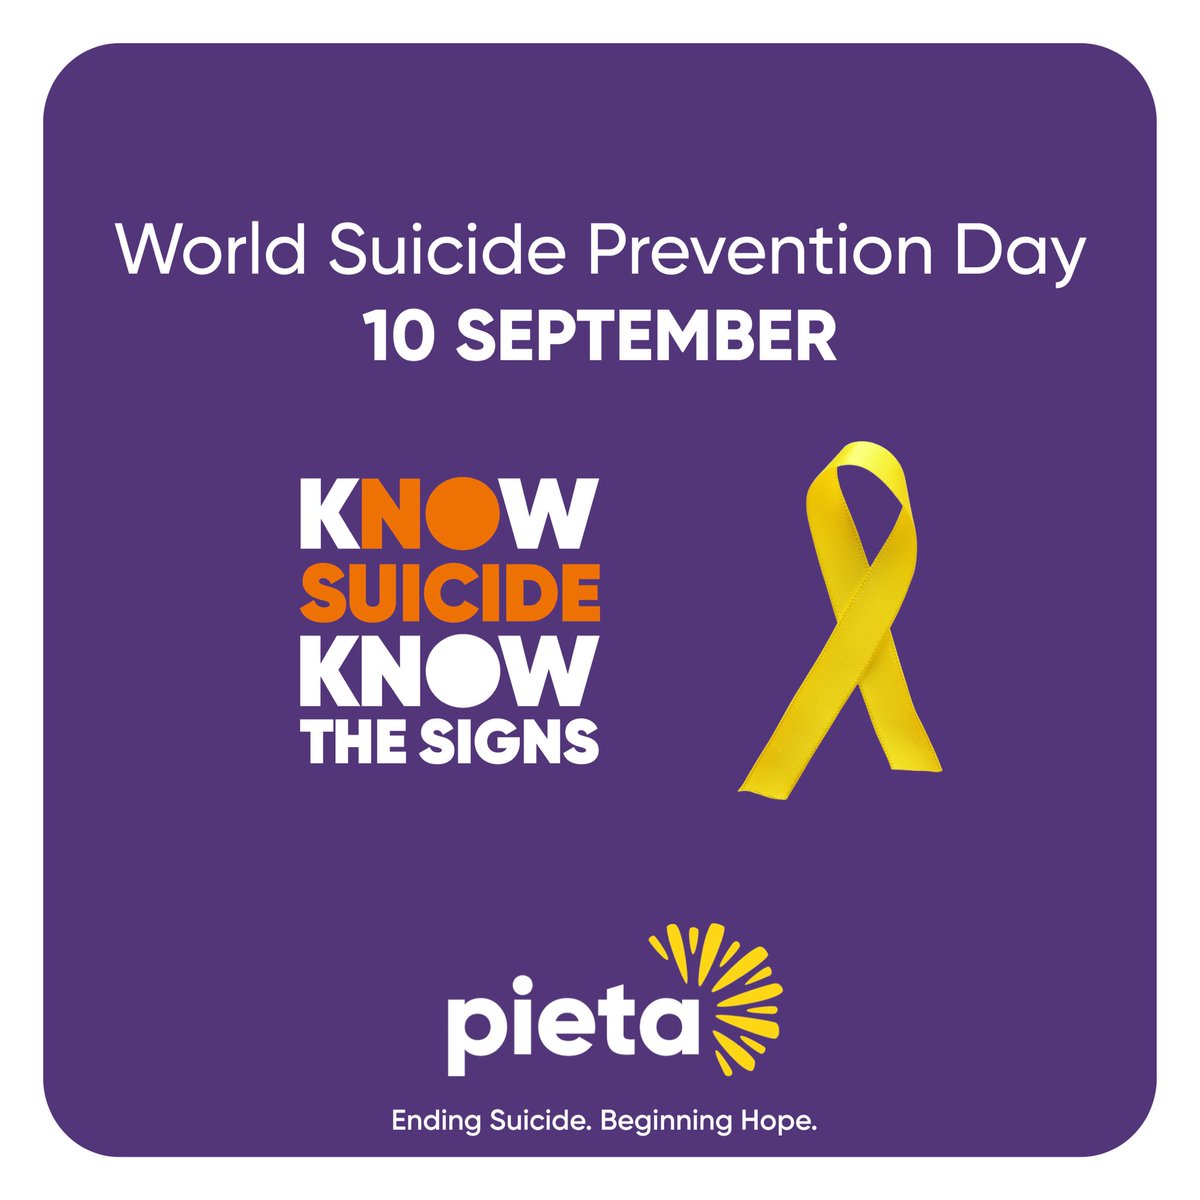 On World Suicide Prevention Day Pieta want to inform you of potential suicide warning signs & steps to take when supporting someone in a suicidal crisis. Please visit  https://www.pieta.ie/how-we-can-help/know-the-signs/ today to understand the potential Signs of Suicide  #WSPD2020    #SuicideSignsPieta 1/5